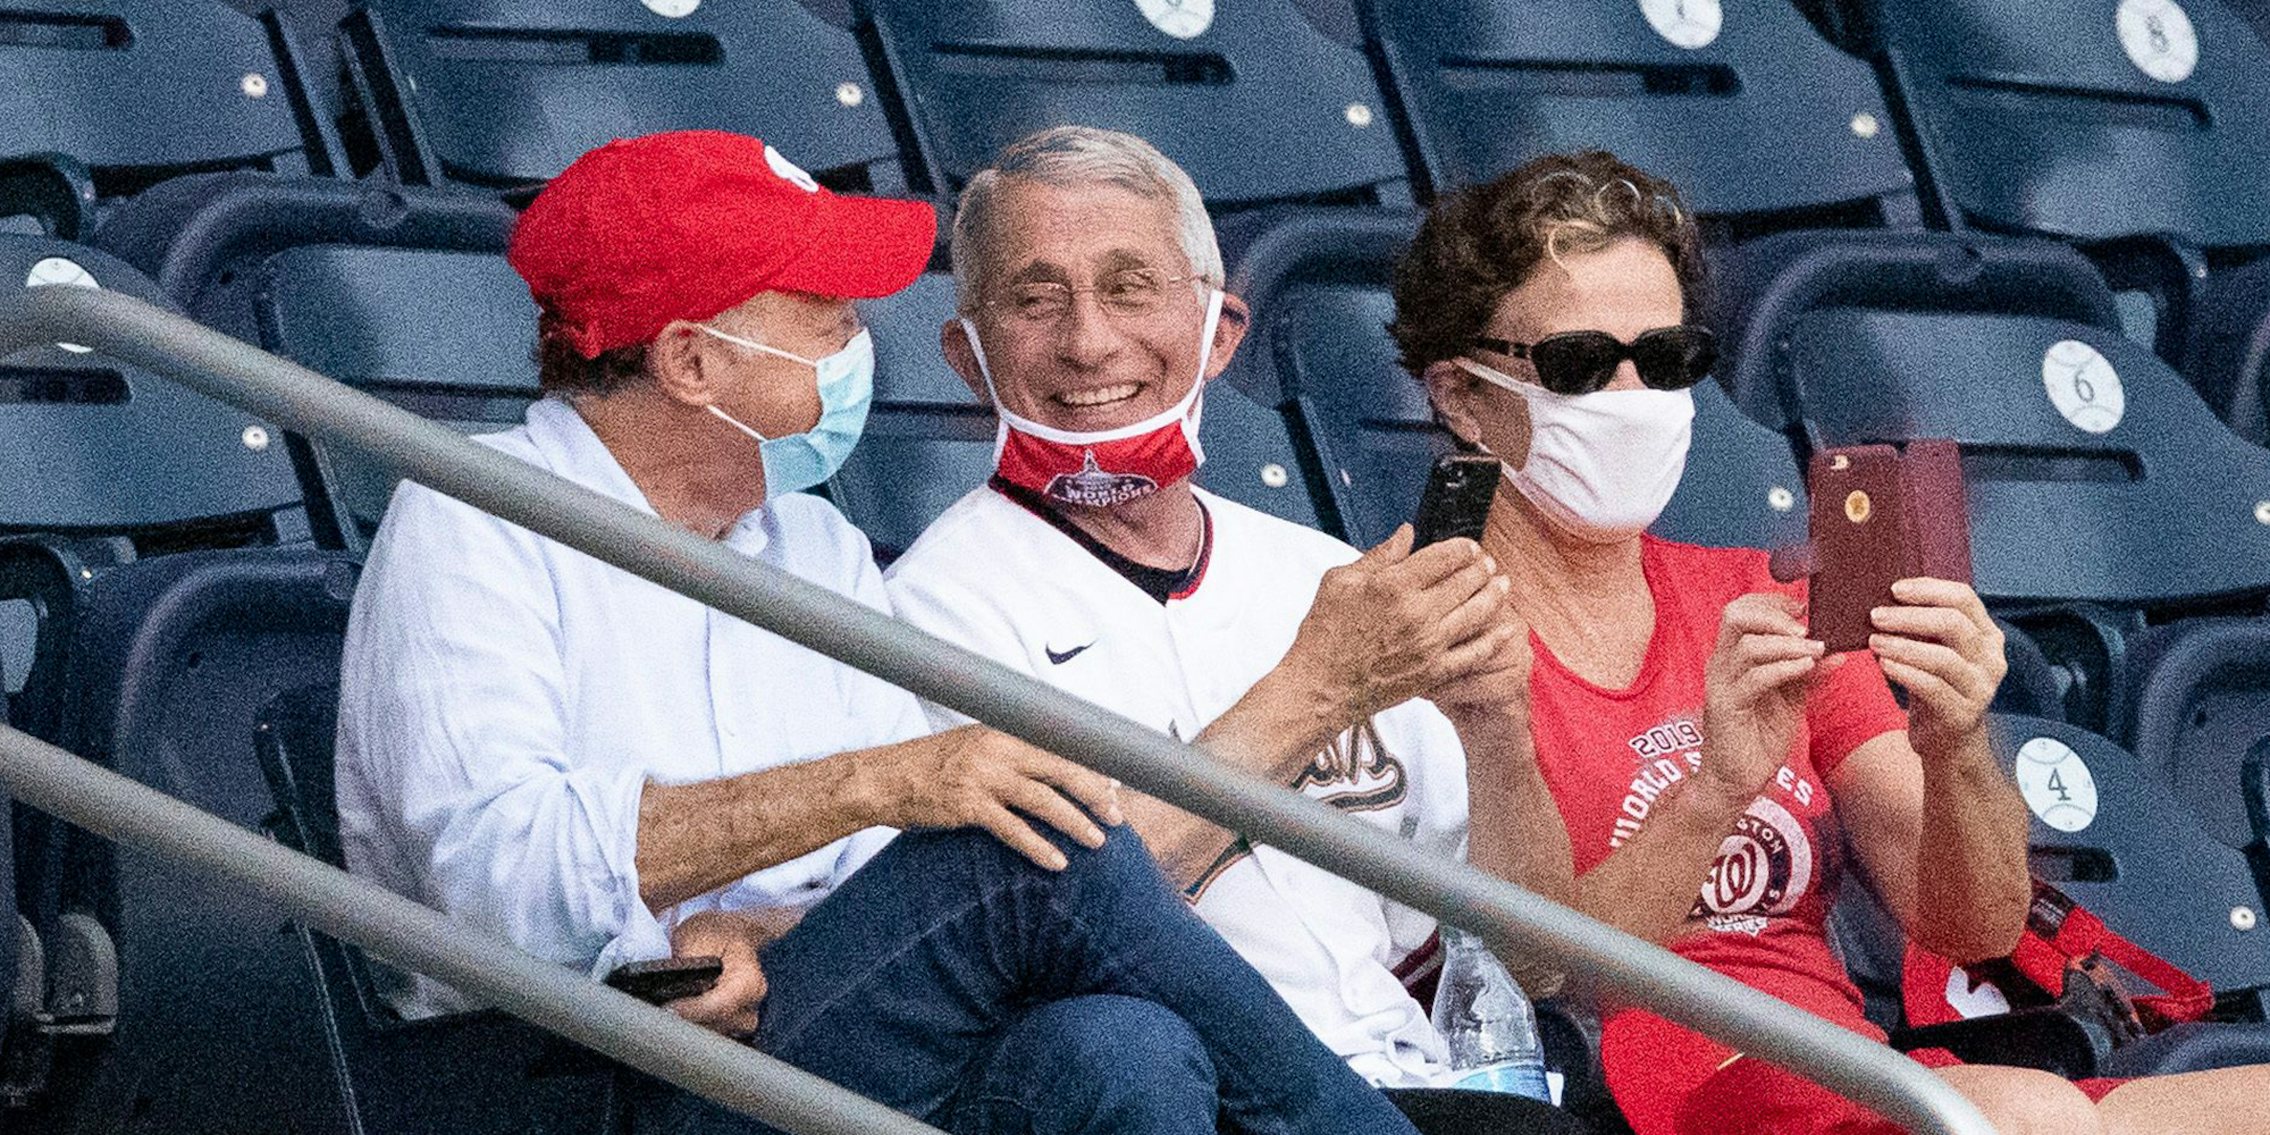 Fauci with mask down at Nationals game